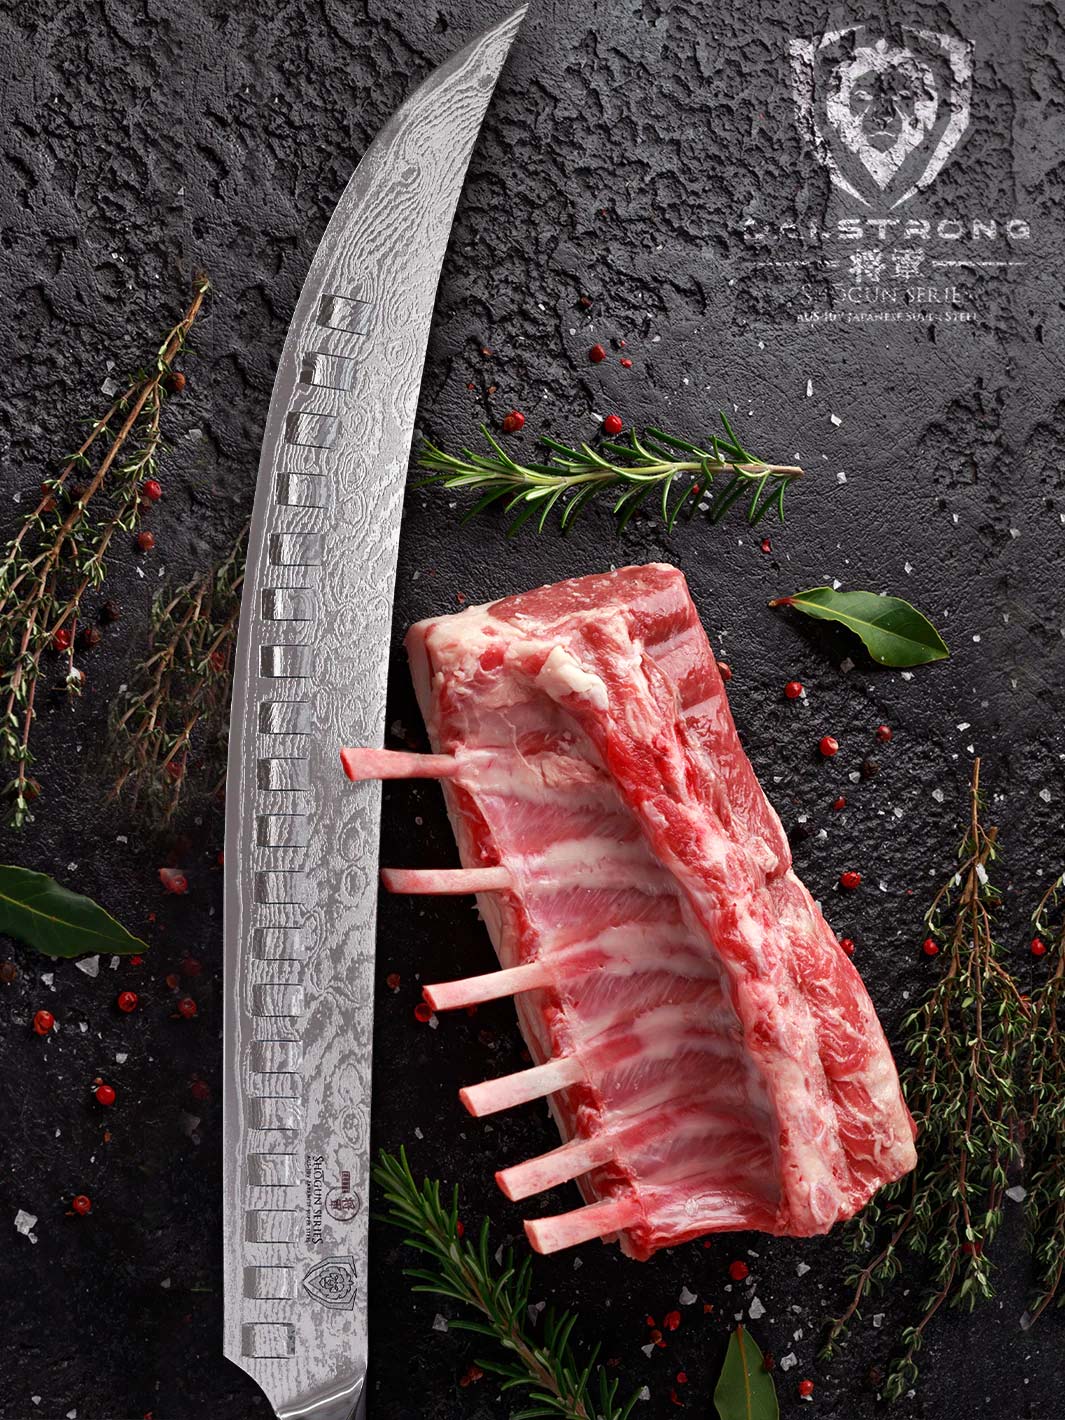 Dalstrong shogun series 12.5 inch butcher knife with a rack of rib beside it.